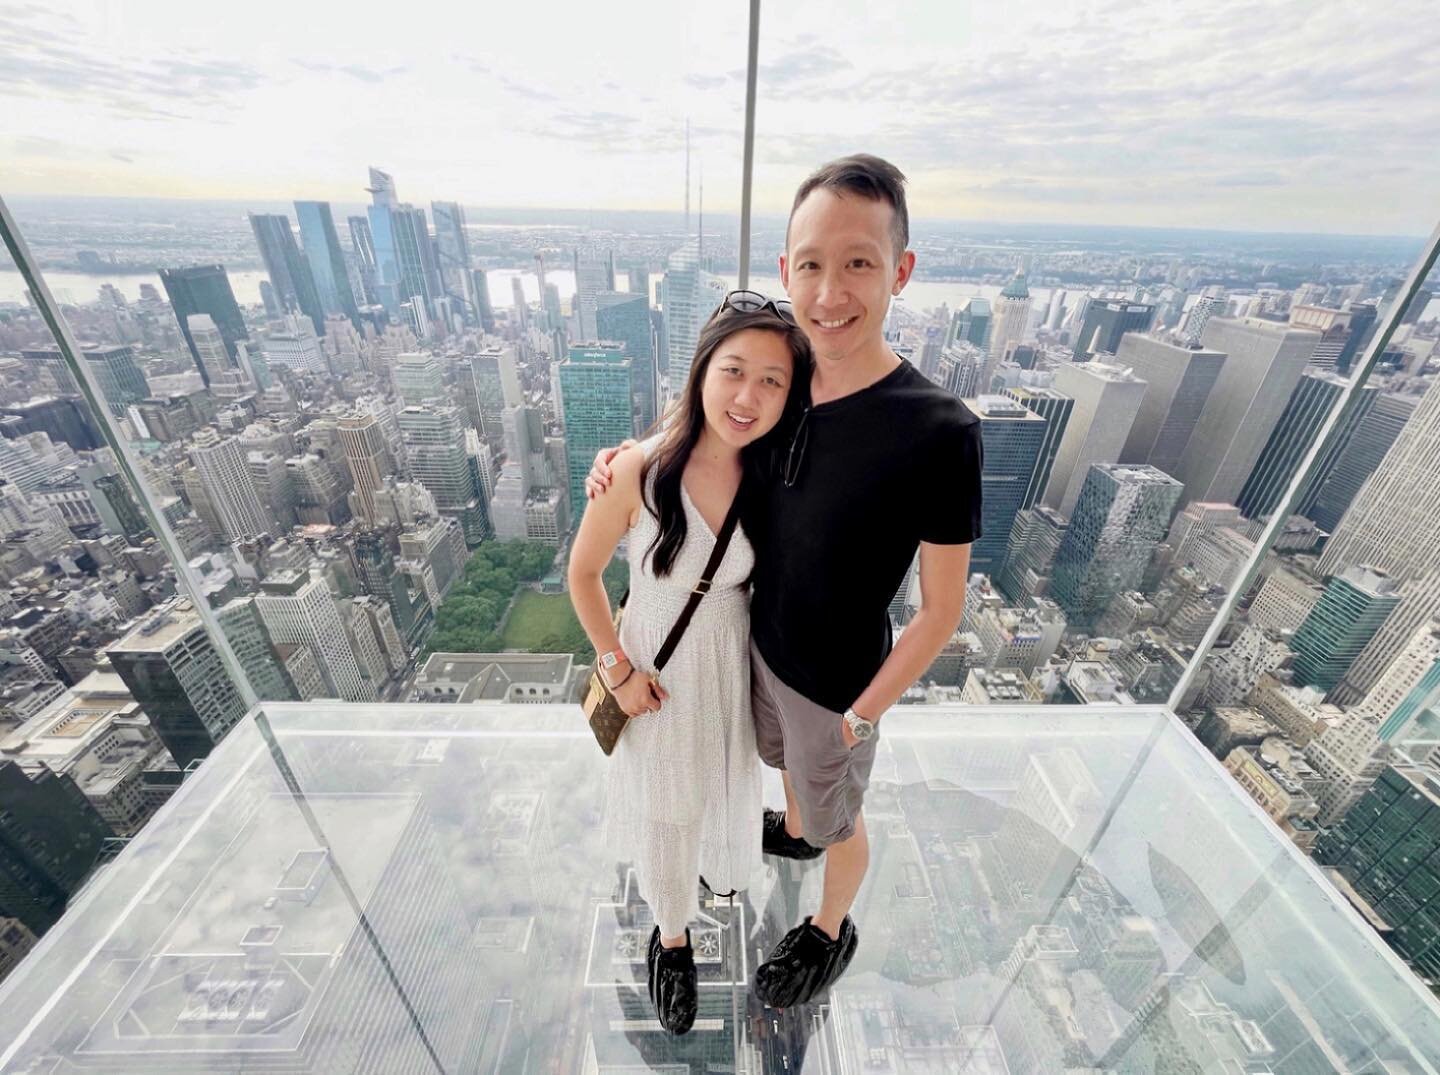 🤍
.
&ldquo;Fall in love with someone who is both 
your safe place and your biggest adventure.&rdquo;
.
A throw back to our time in New York, 
celebrating Kev&rsquo;s 35th birthday 🤍
.
Deepening my appreciation
for travelling together in a big city;